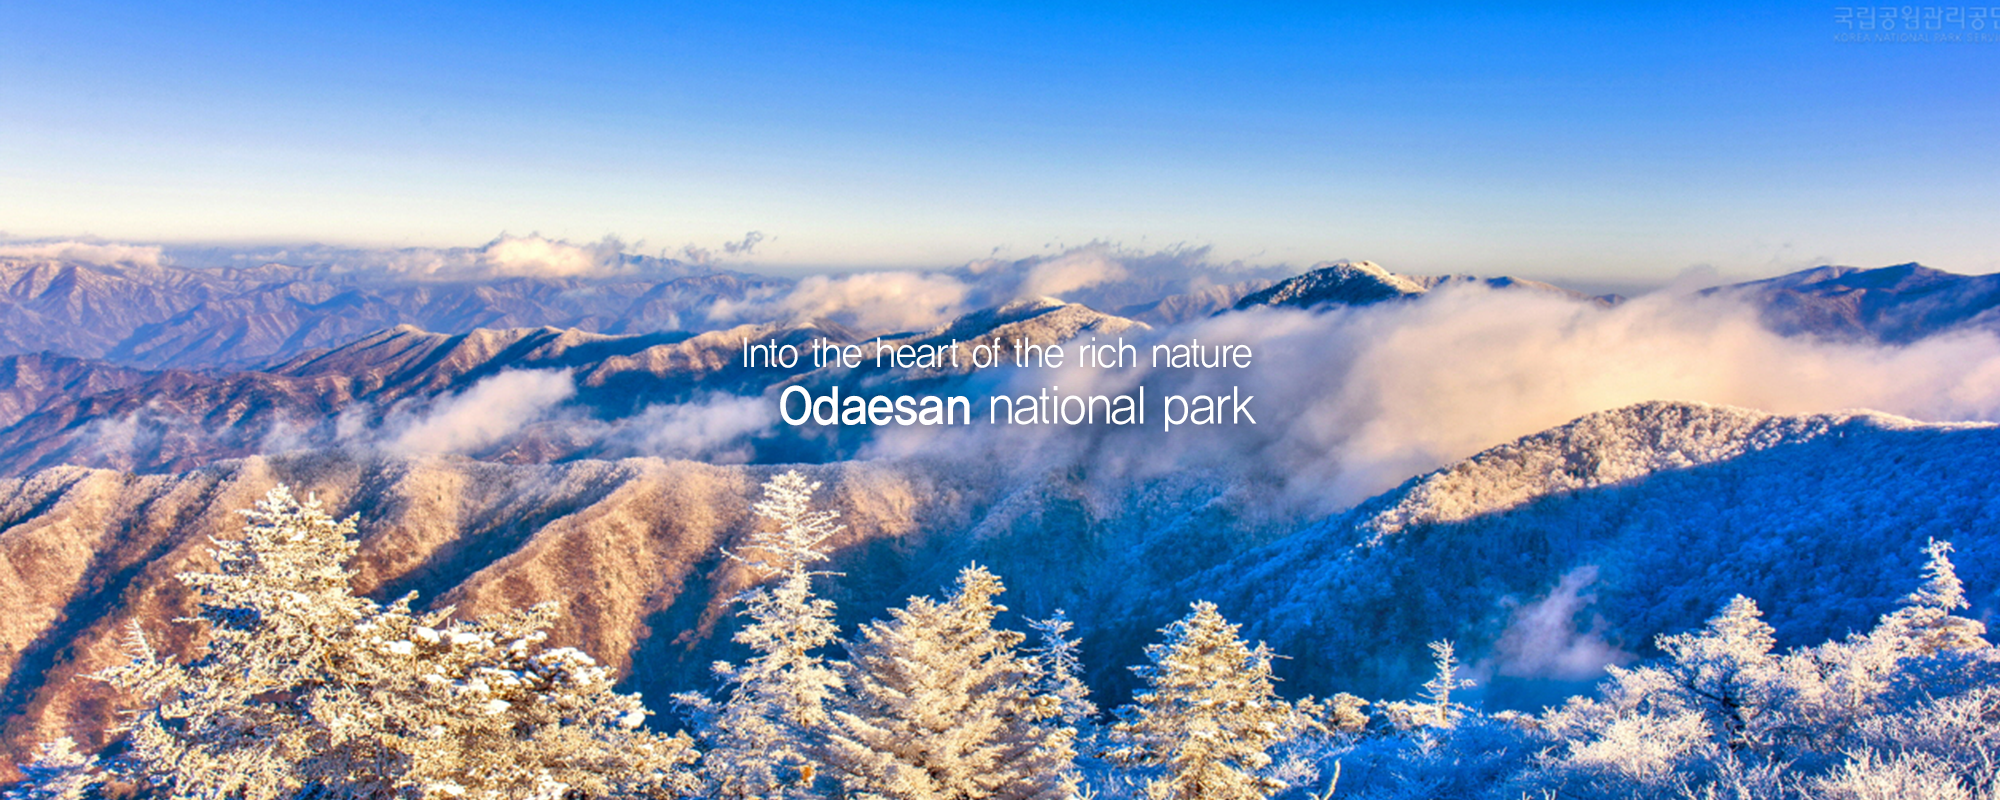 
Into the heart of the rich nature - Odaesan national park